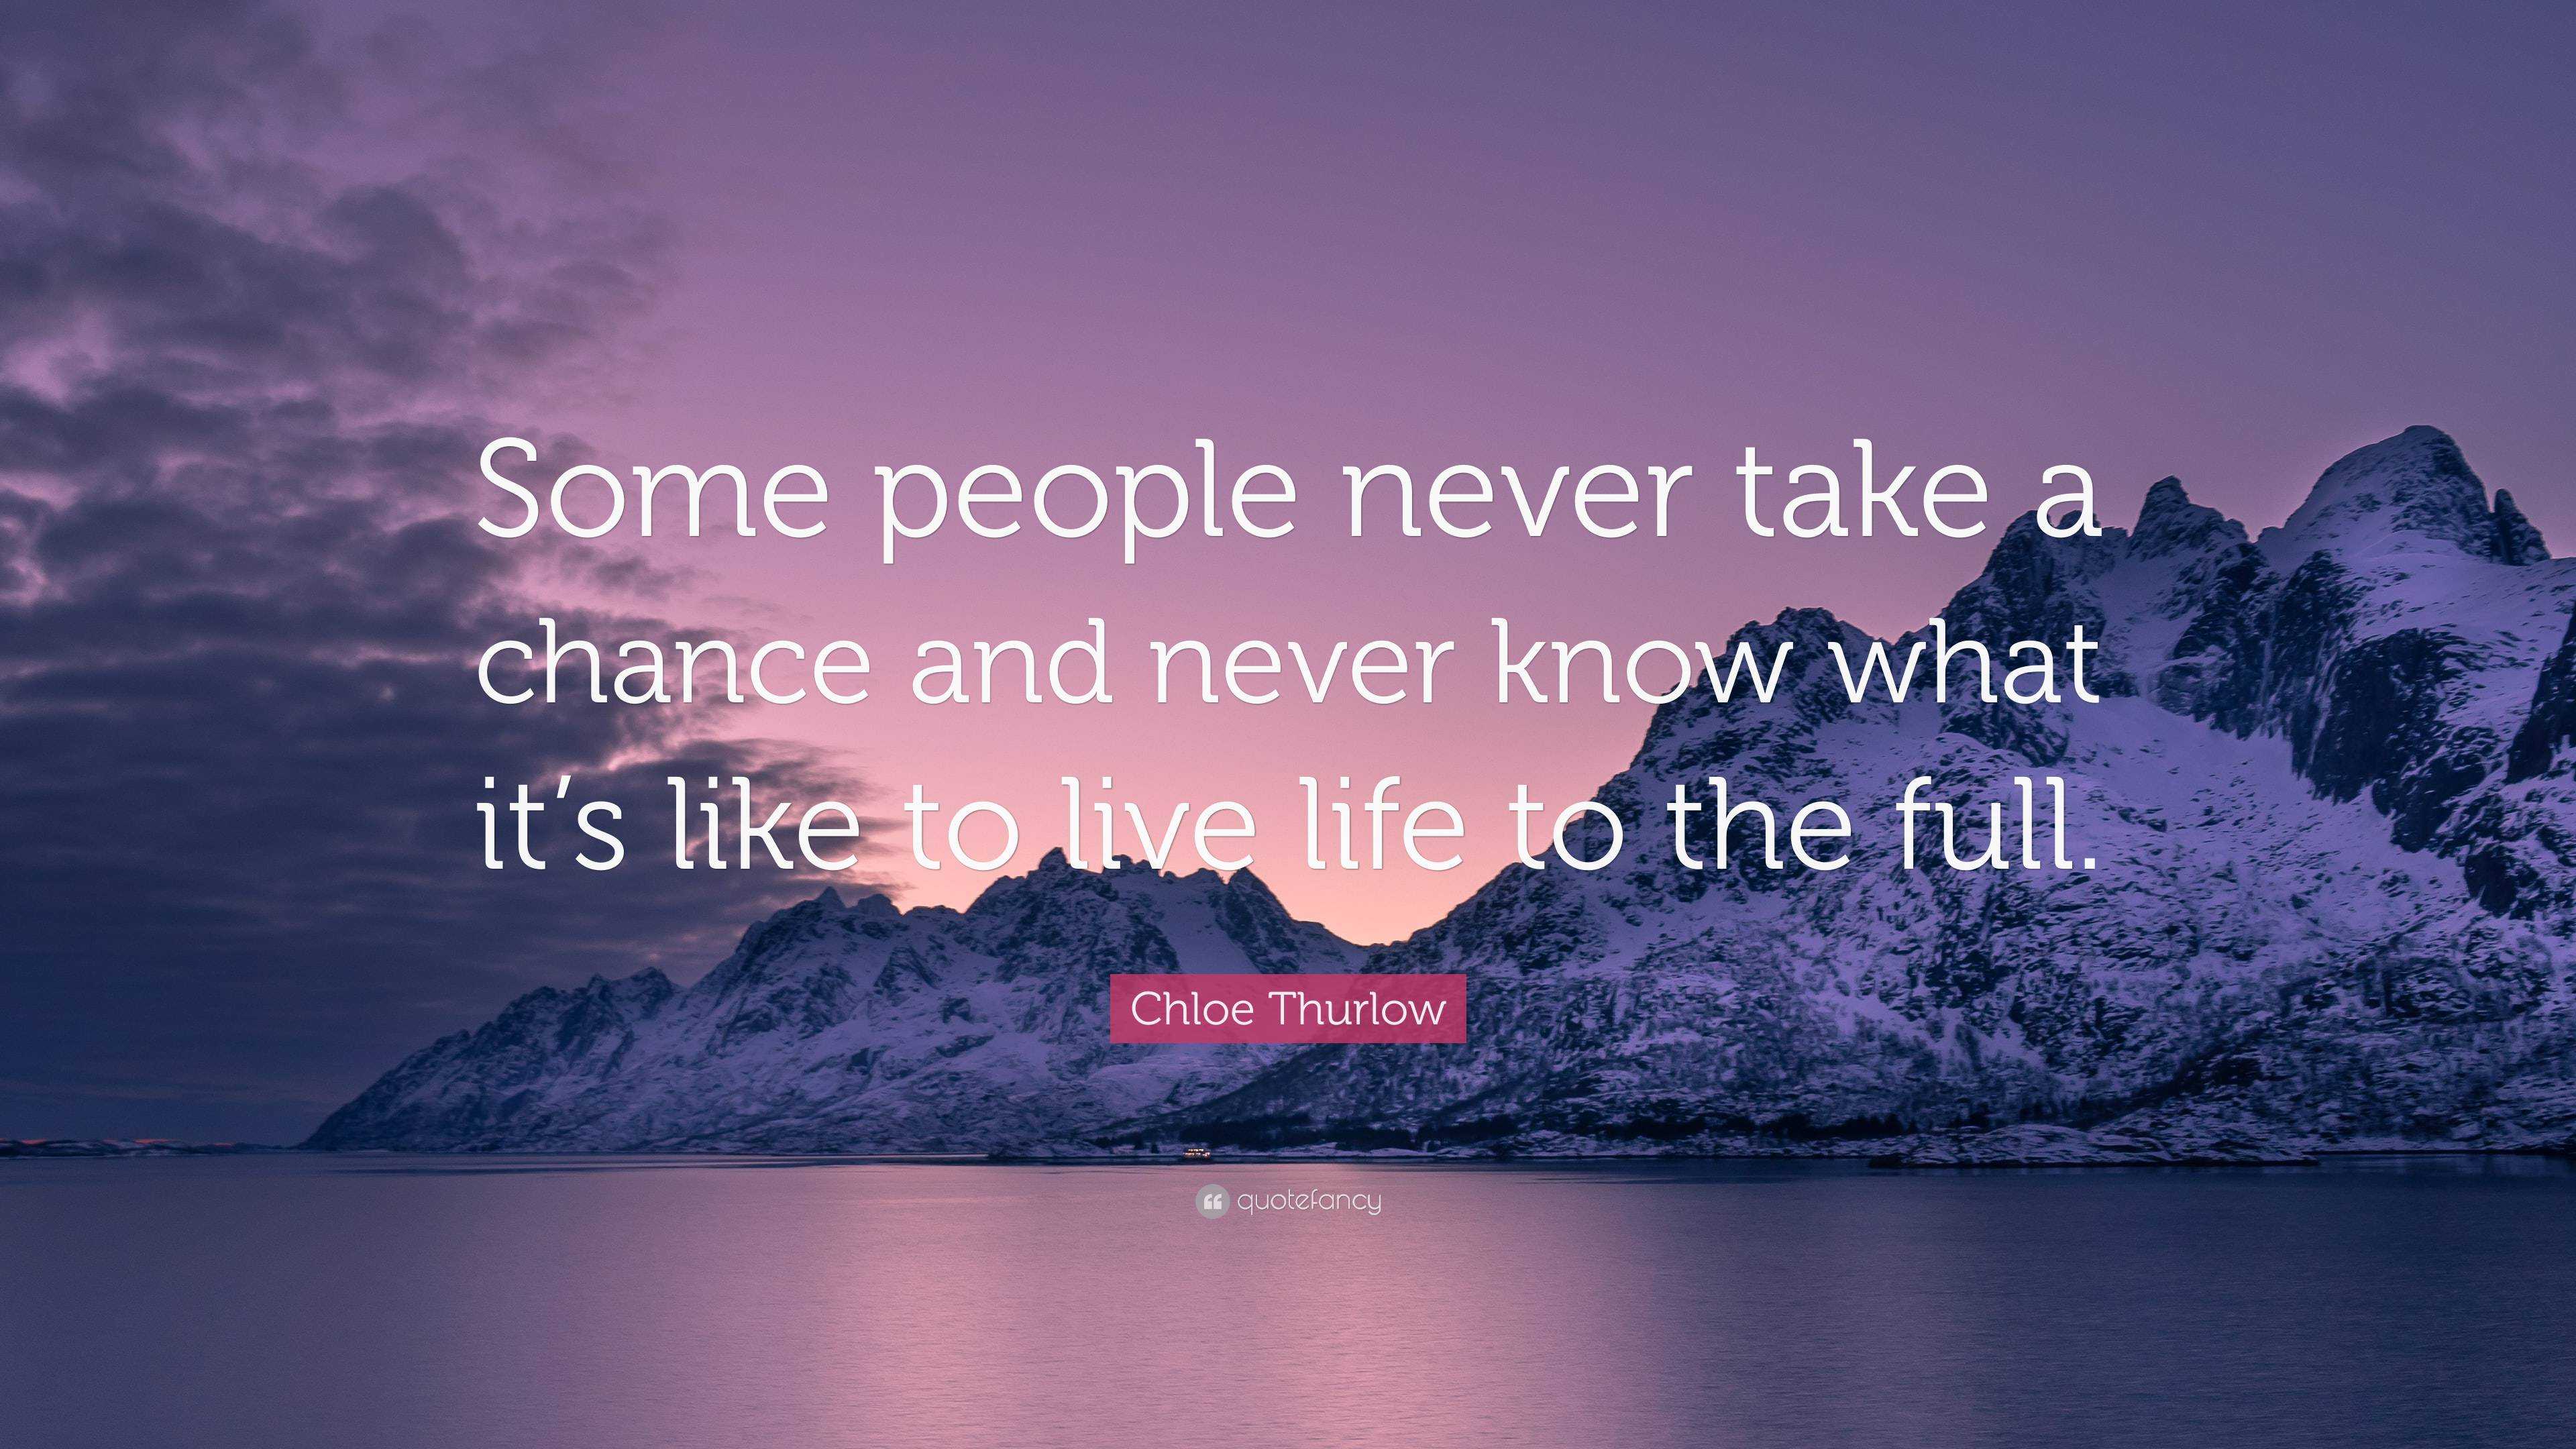 Chloe Thurlow Quote: “Some people never take a chance and never know ...